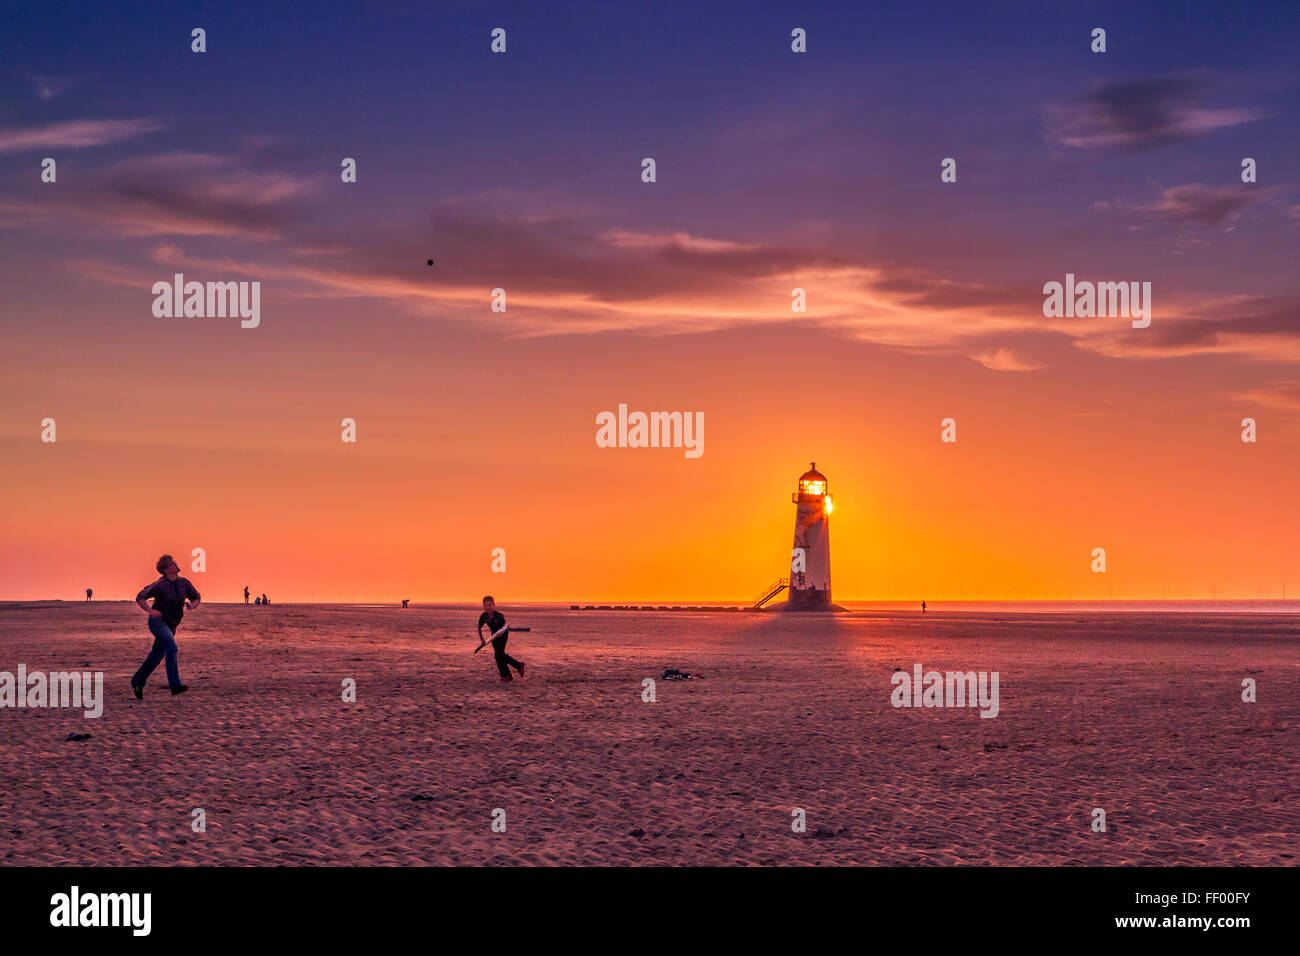 Playing beach cricket on Talacre beach at sunset. Stock Photo